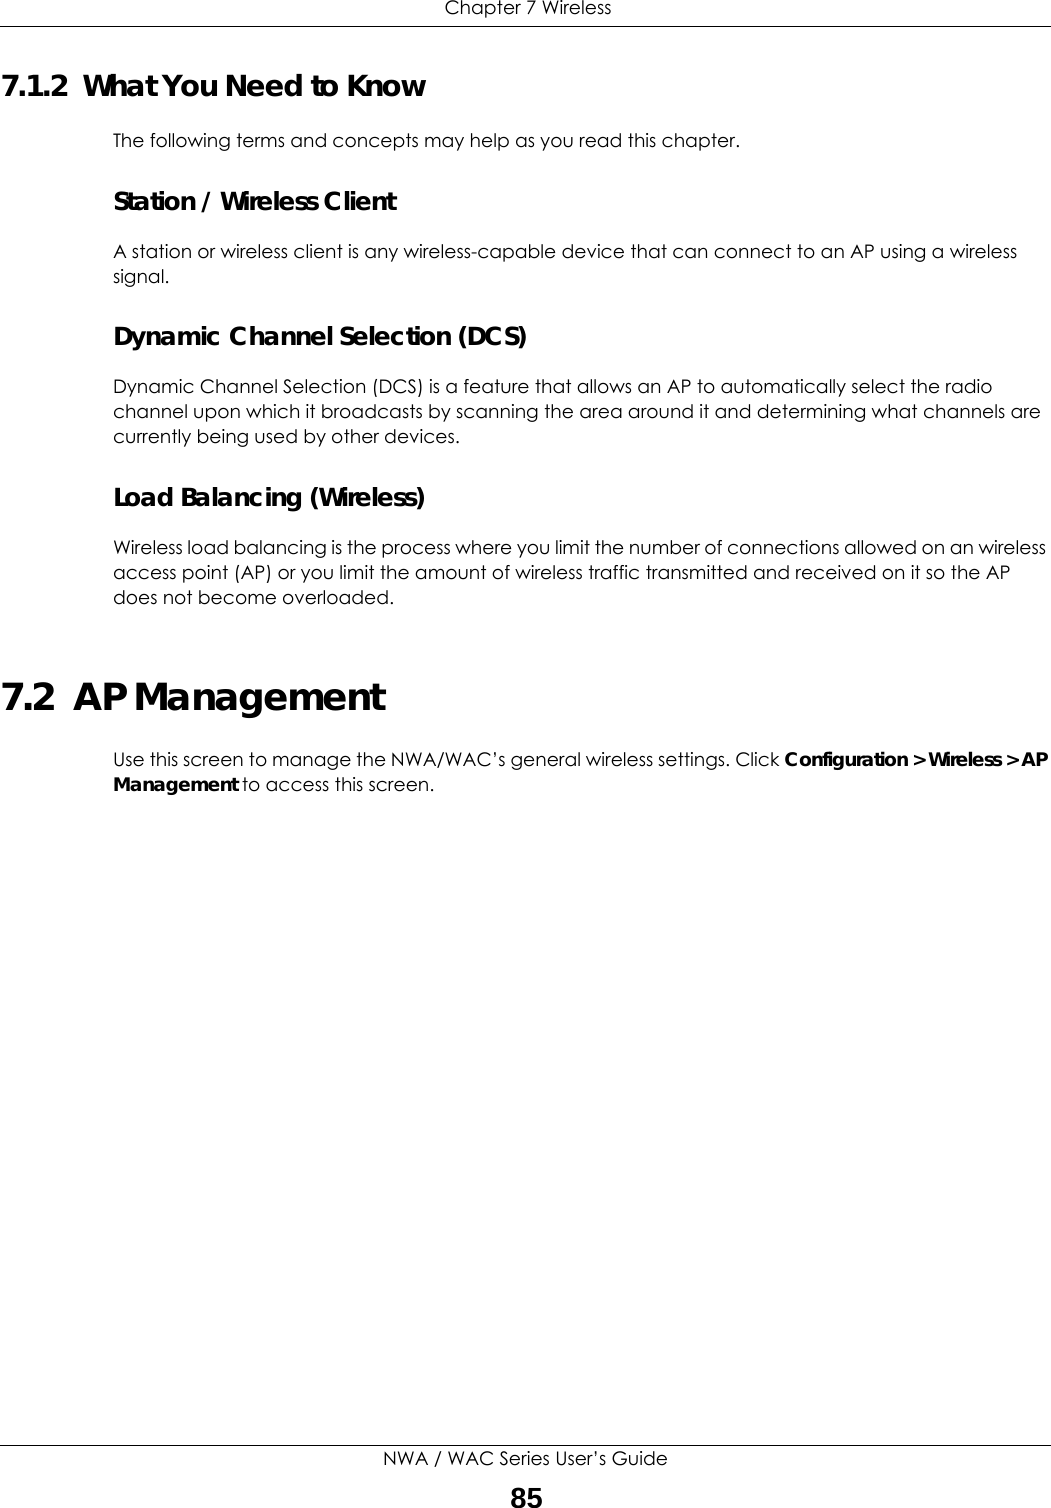  Chapter 7 WirelessNWA / WAC Series User’s Guide857.1.2  What You Need to KnowThe following terms and concepts may help as you read this chapter.Station / Wireless ClientA station or wireless client is any wireless-capable device that can connect to an AP using a wireless signal.Dynamic Channel Selection (DCS)Dynamic Channel Selection (DCS) is a feature that allows an AP to automatically select the radio channel upon which it broadcasts by scanning the area around it and determining what channels are currently being used by other devices.Load Balancing (Wireless)Wireless load balancing is the process where you limit the number of connections allowed on an wireless access point (AP) or you limit the amount of wireless traffic transmitted and received on it so the AP does not become overloaded. 7.2  AP ManagementUse this screen to manage the NWA/WAC’s general wireless settings. Click Configuration &gt; Wireless &gt; AP Management to access this screen. 